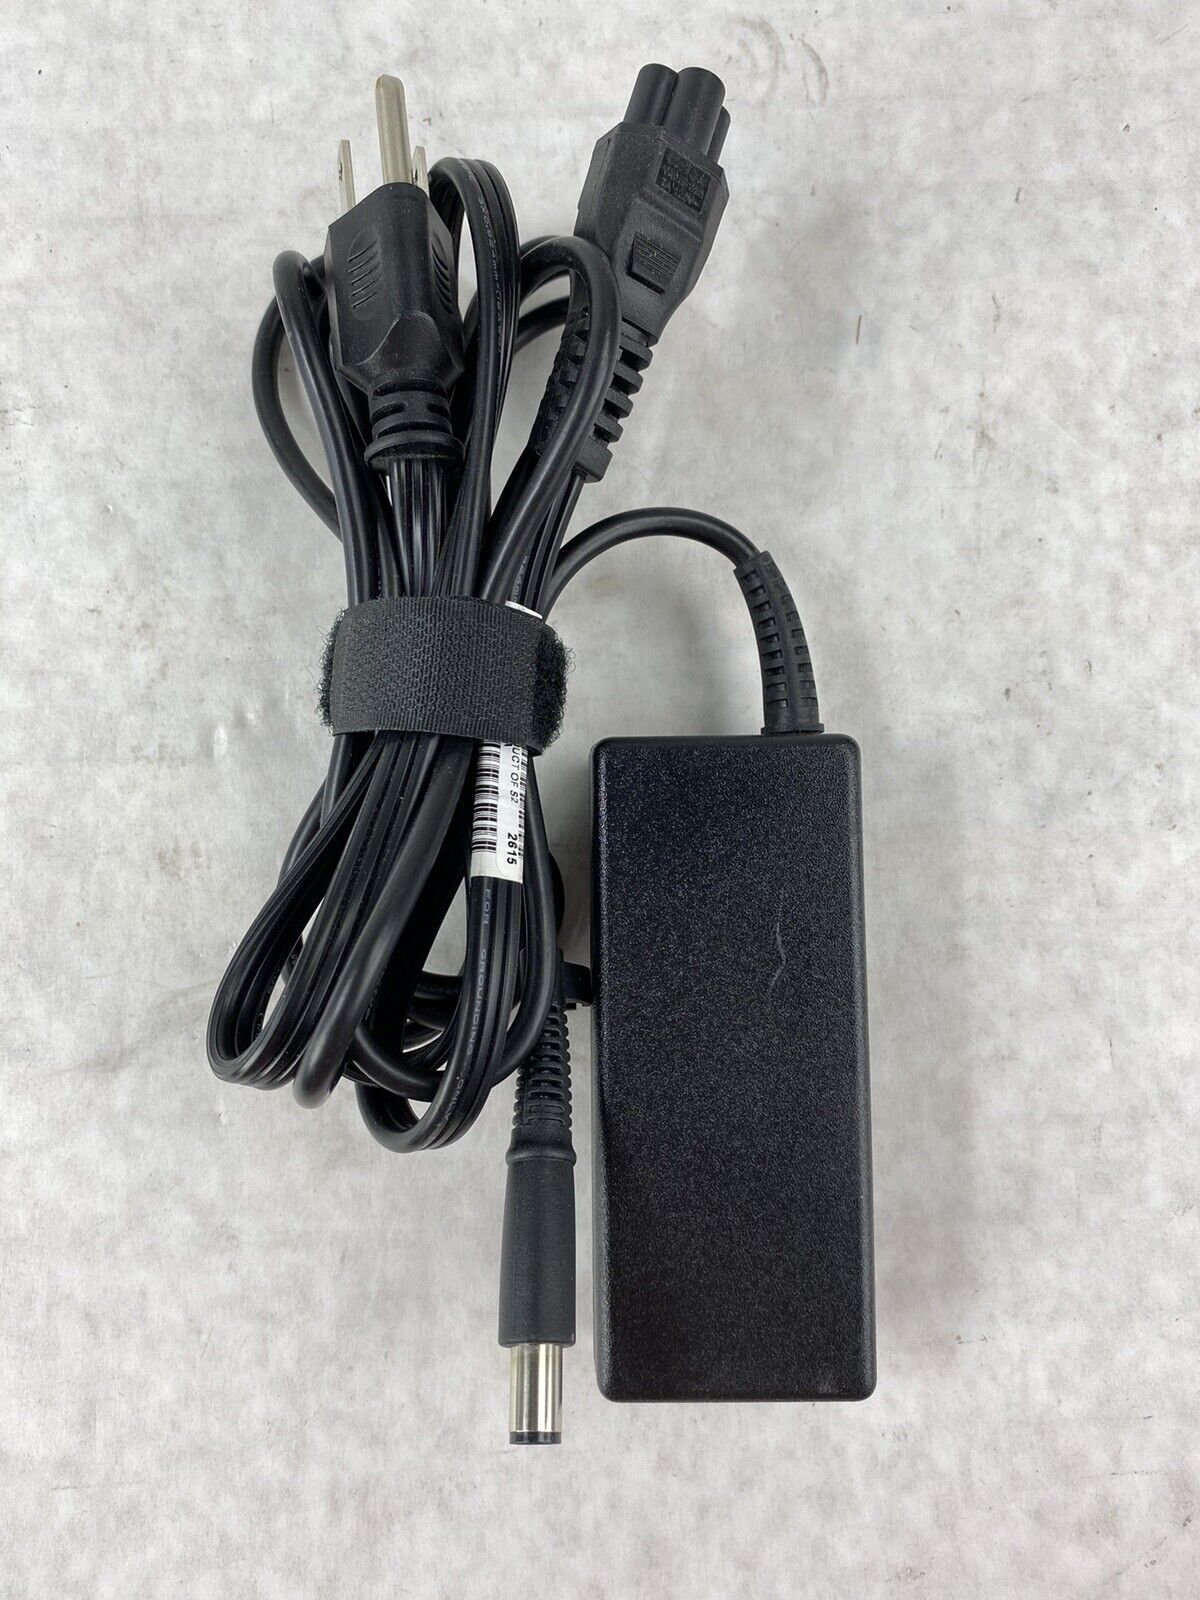 HP PPP009D 19.5V 3.33A 65W AC Adapter